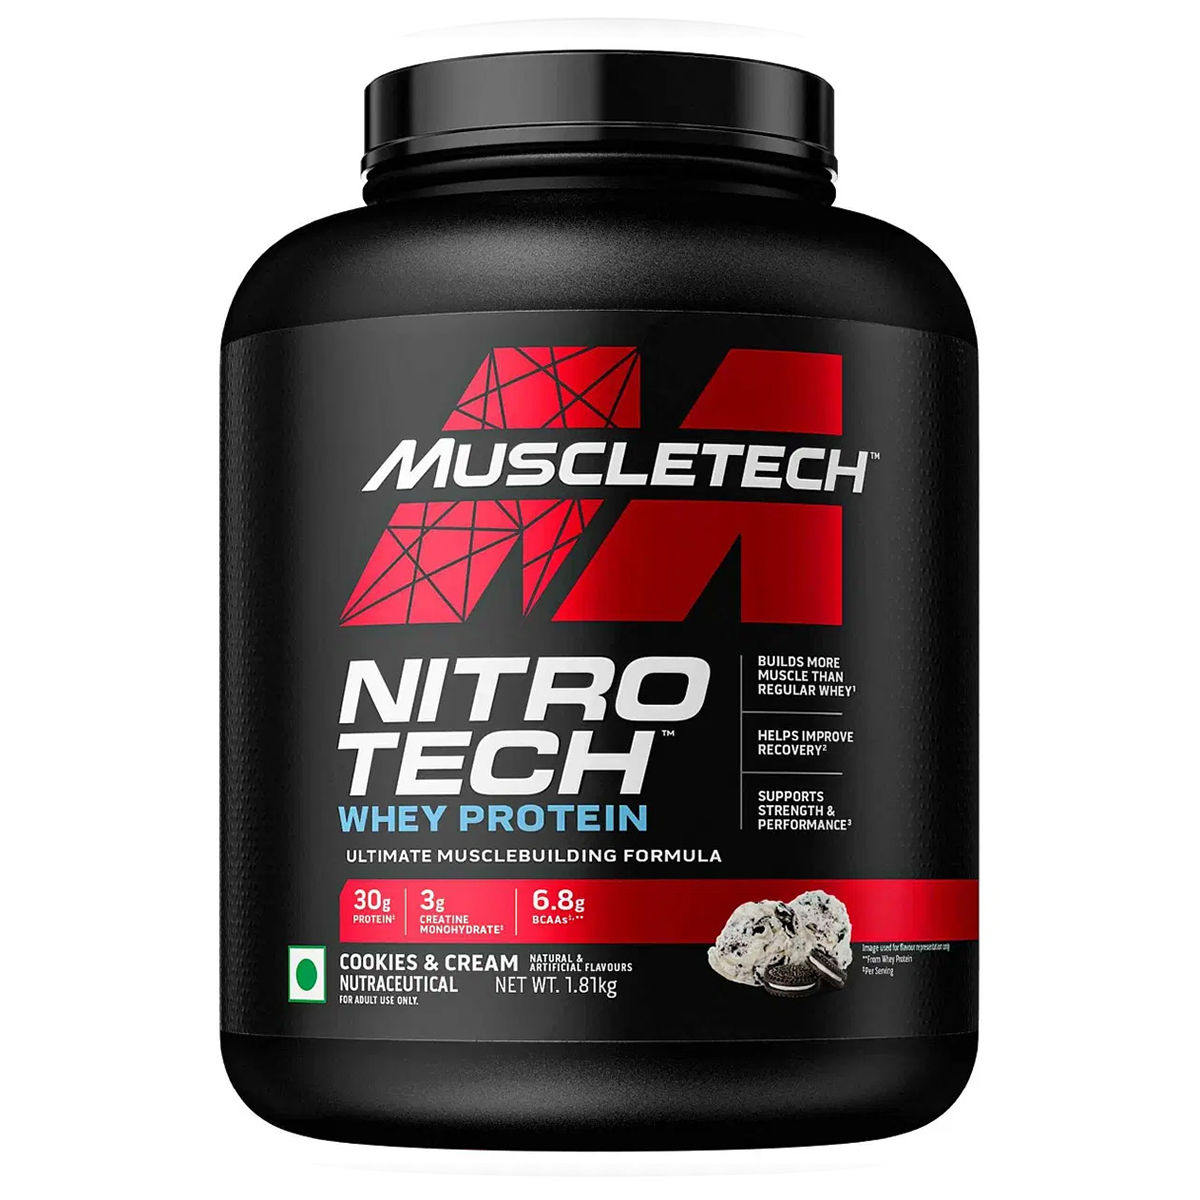 Buy Muscletech Nitrotech Whey Protein Cookies & Cream Flavour Powder, 1.81 kg Online